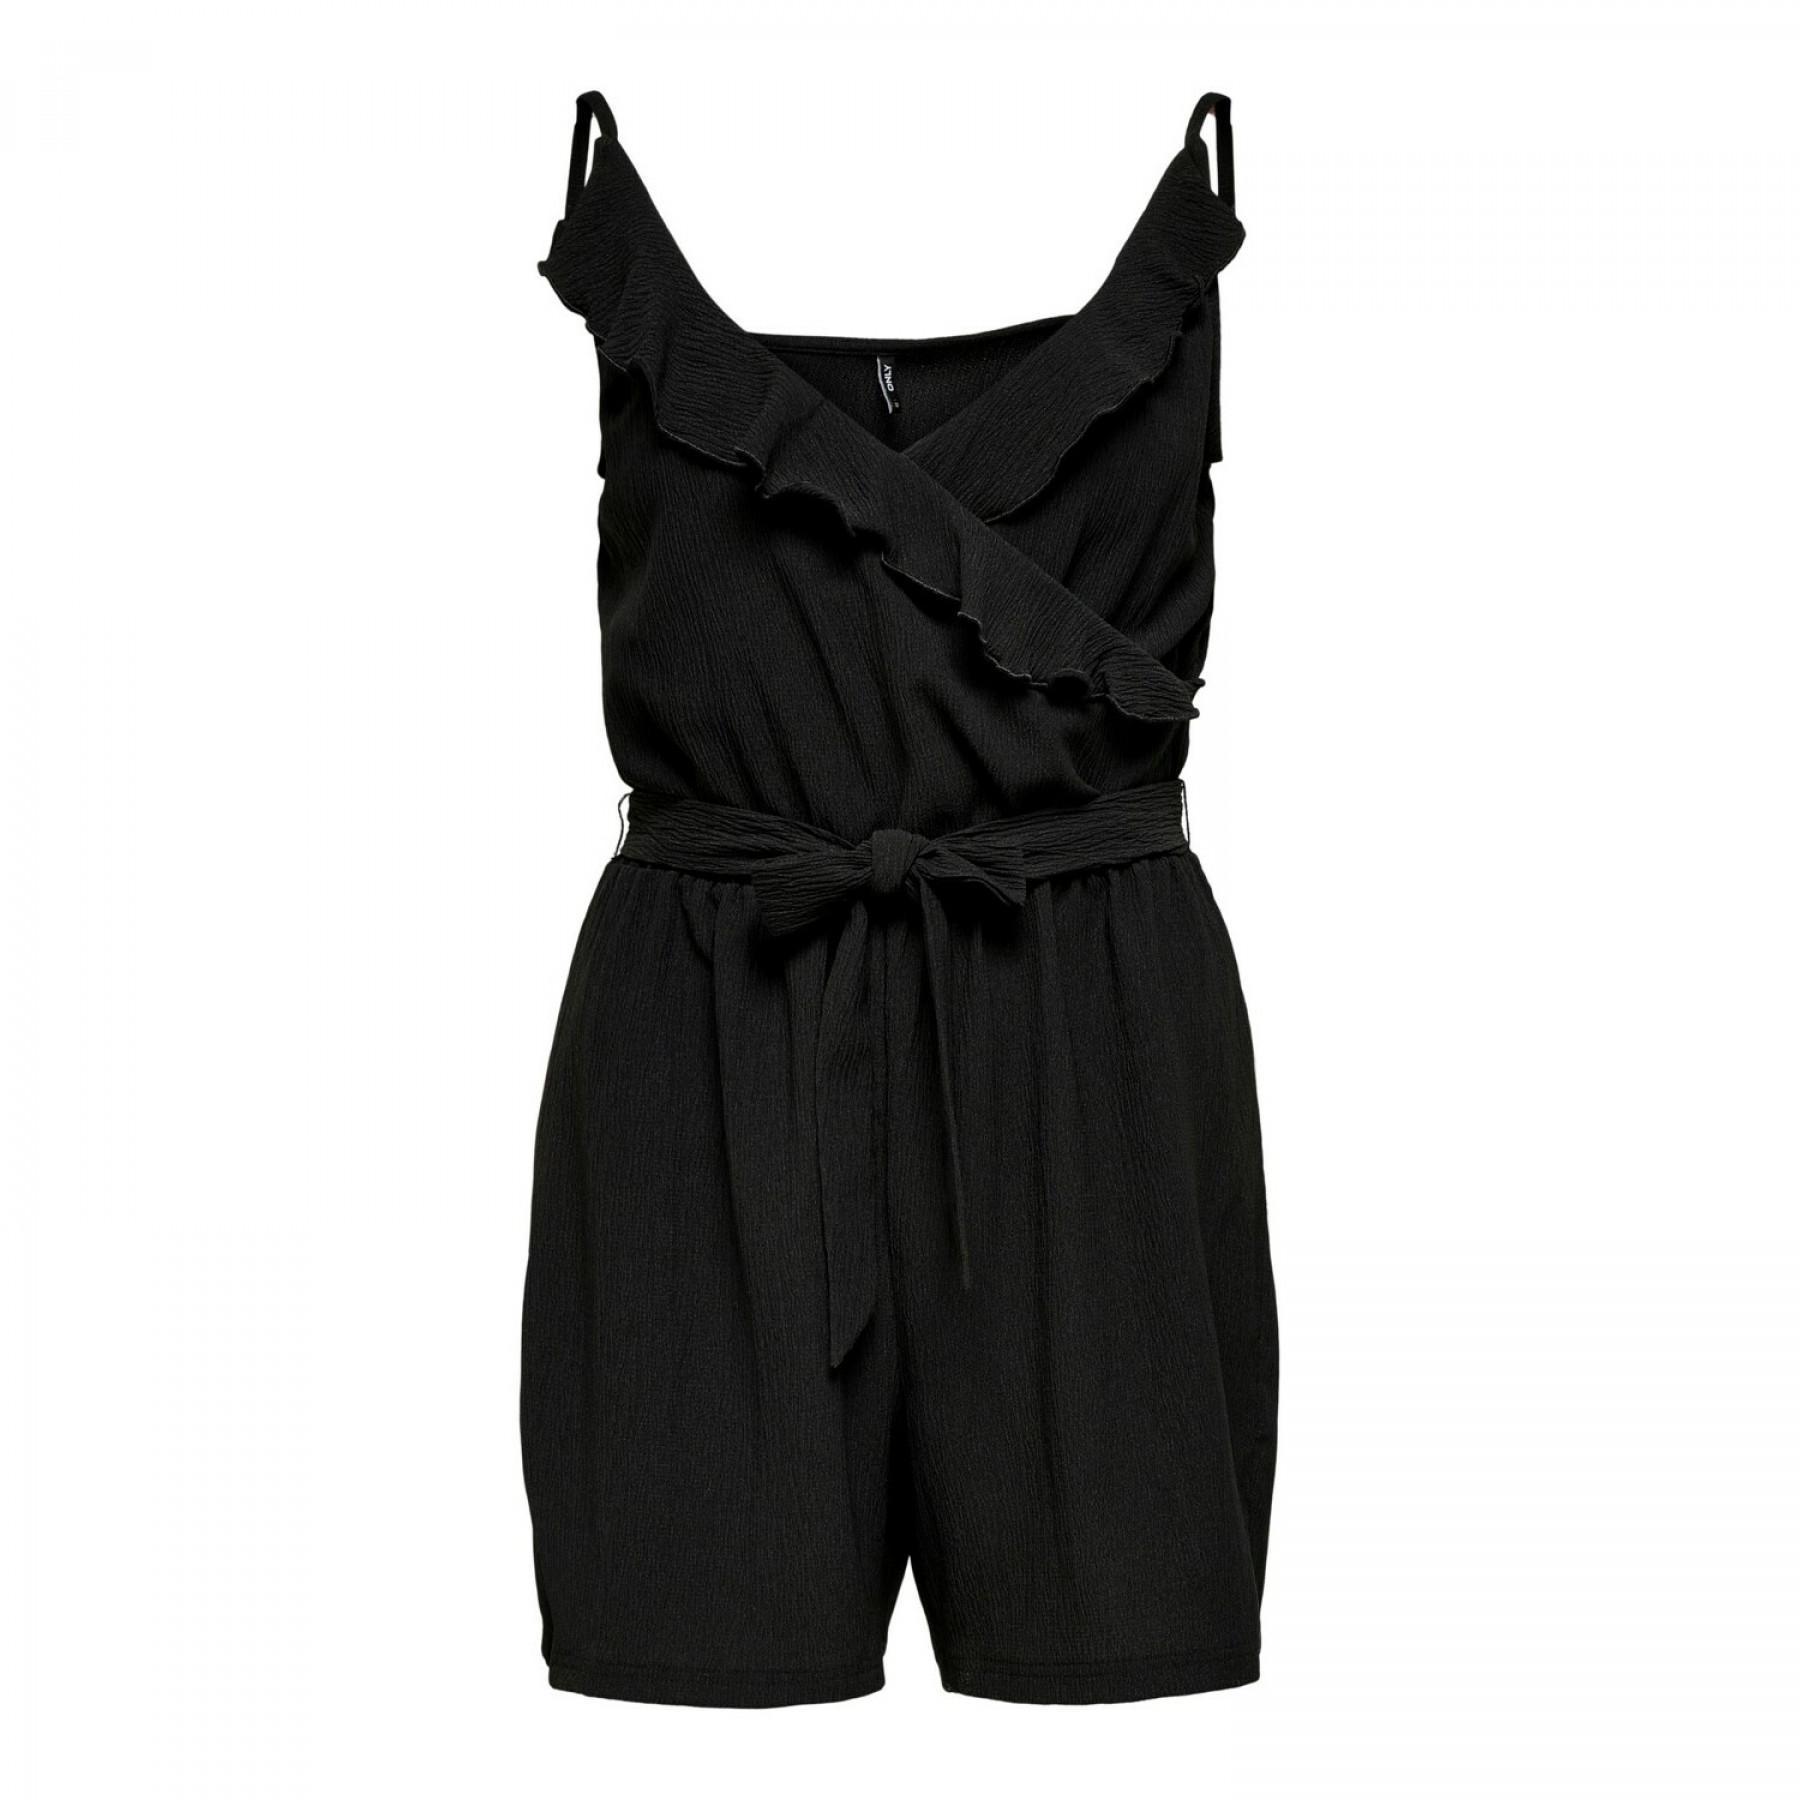 Women's Playsuits Only onlsaga